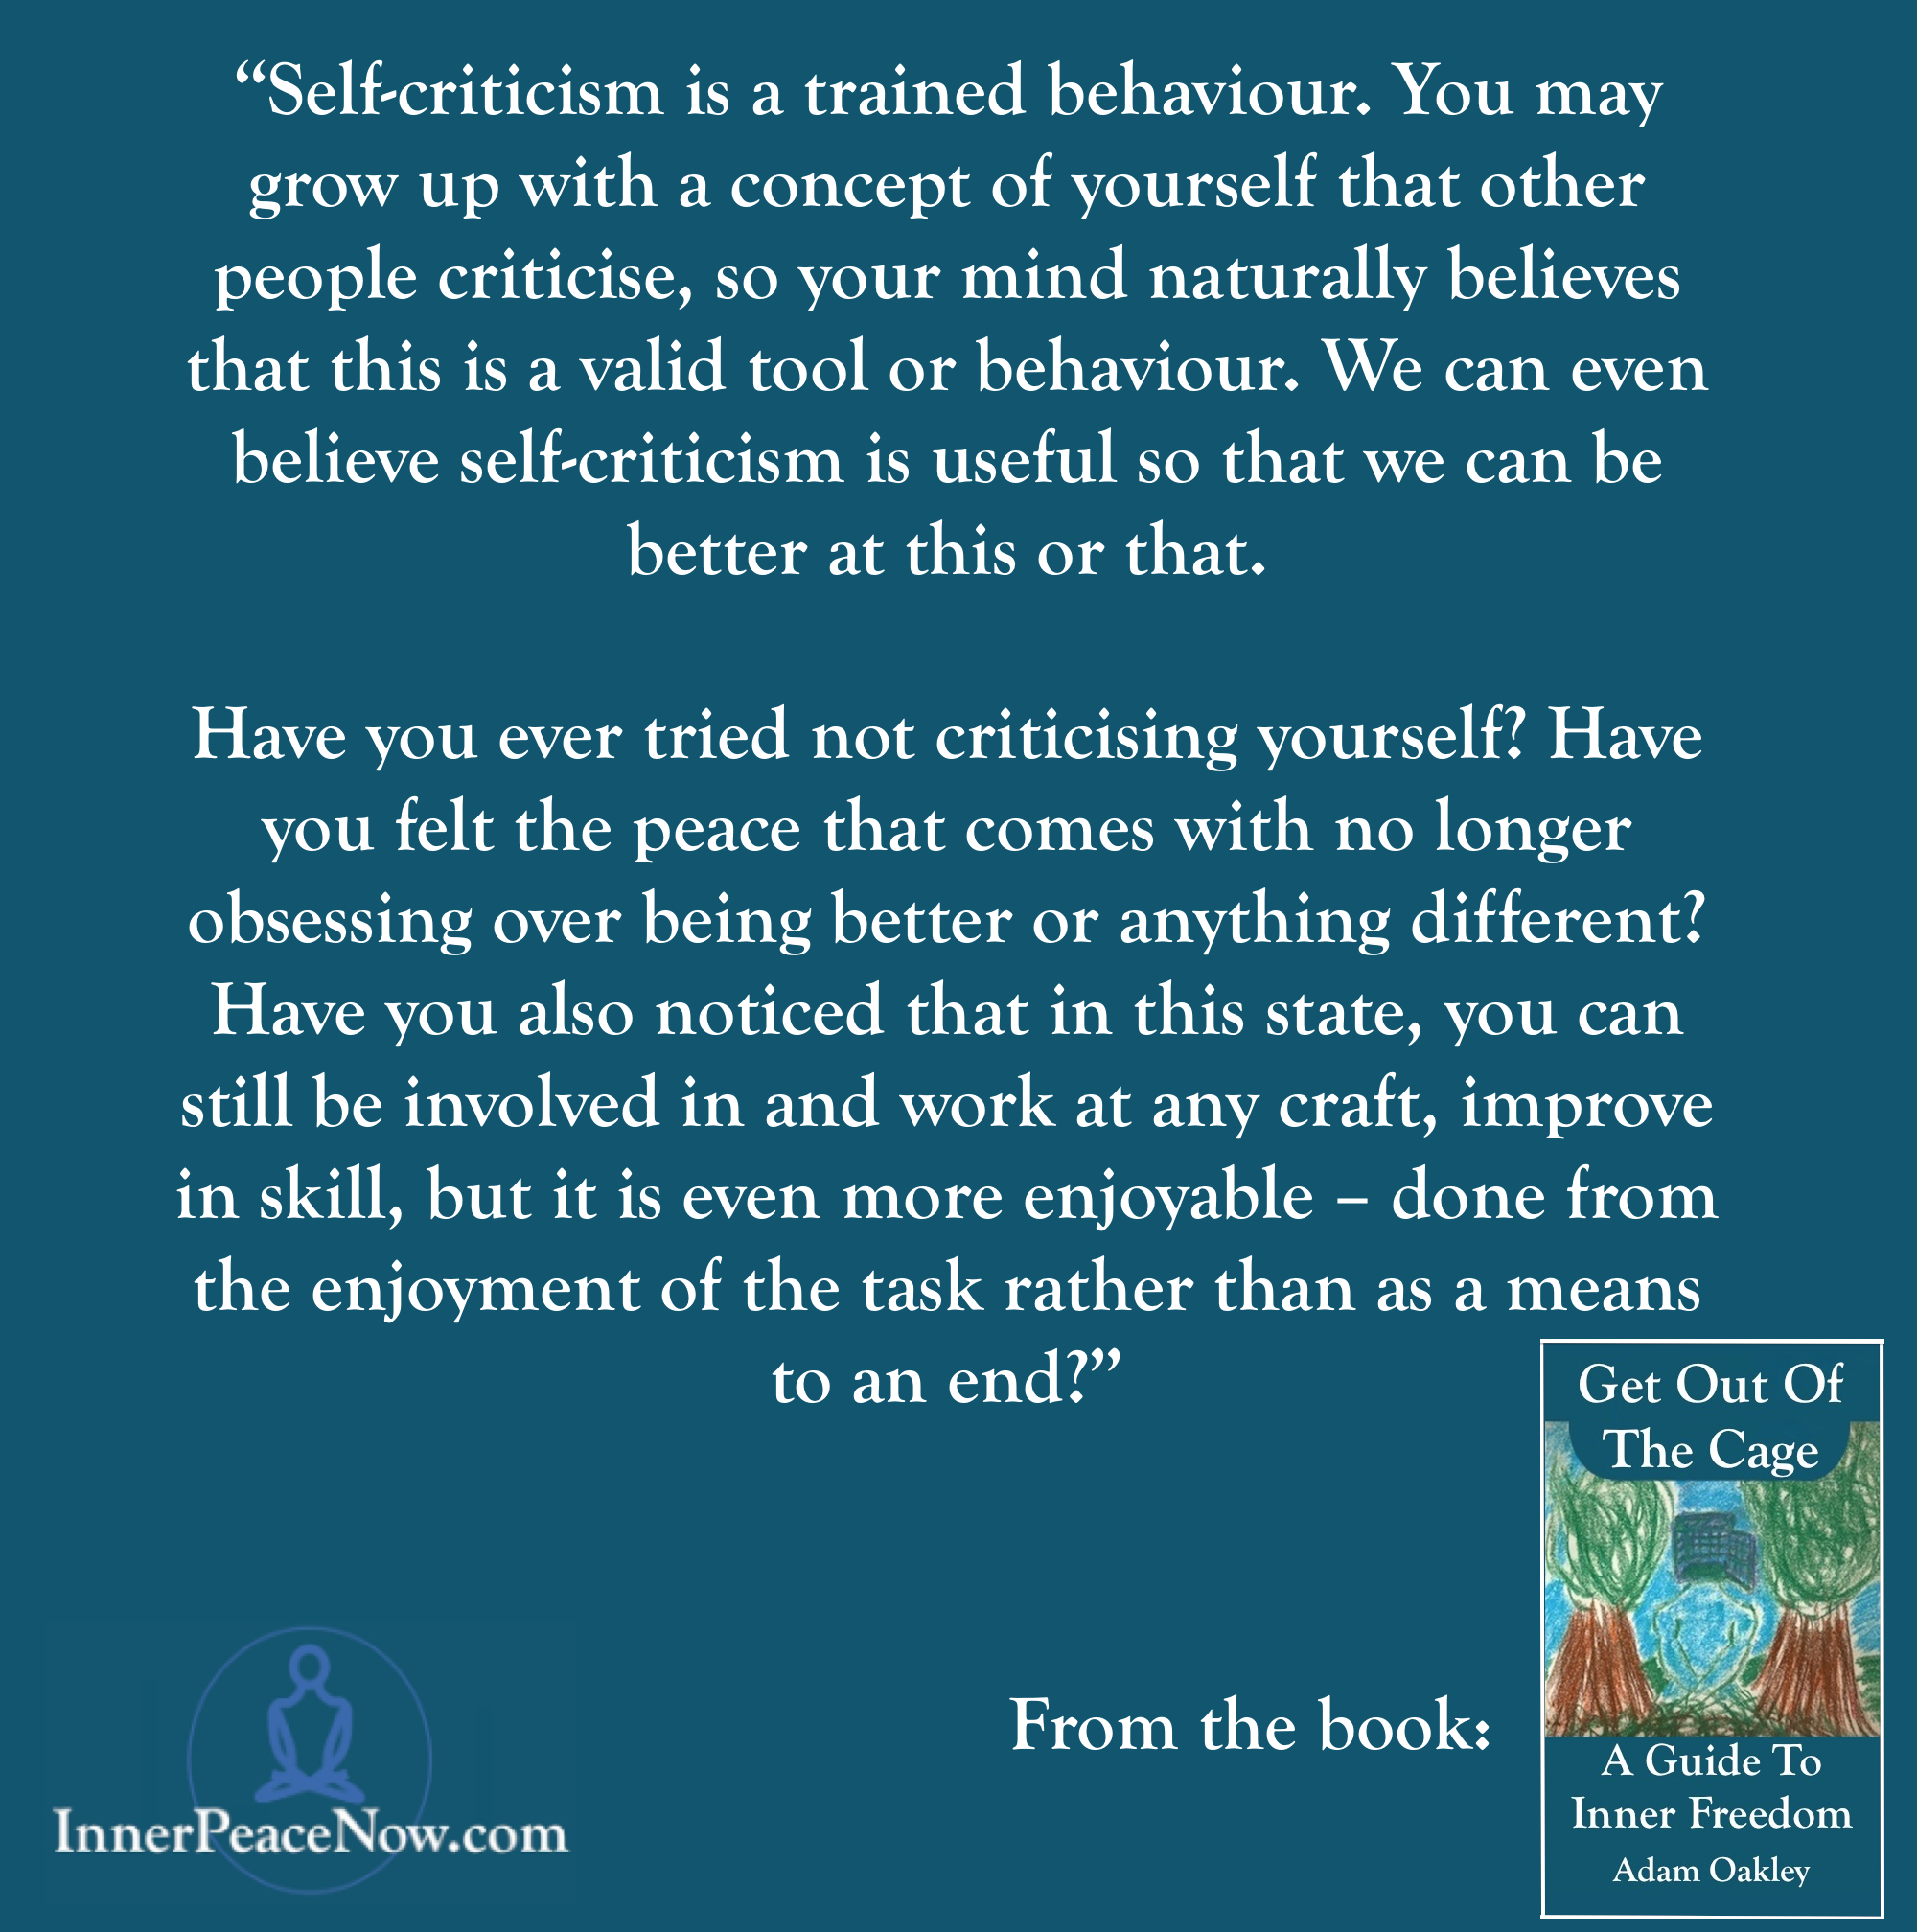 Self-Criticism - Get Out Of The Cage Quote